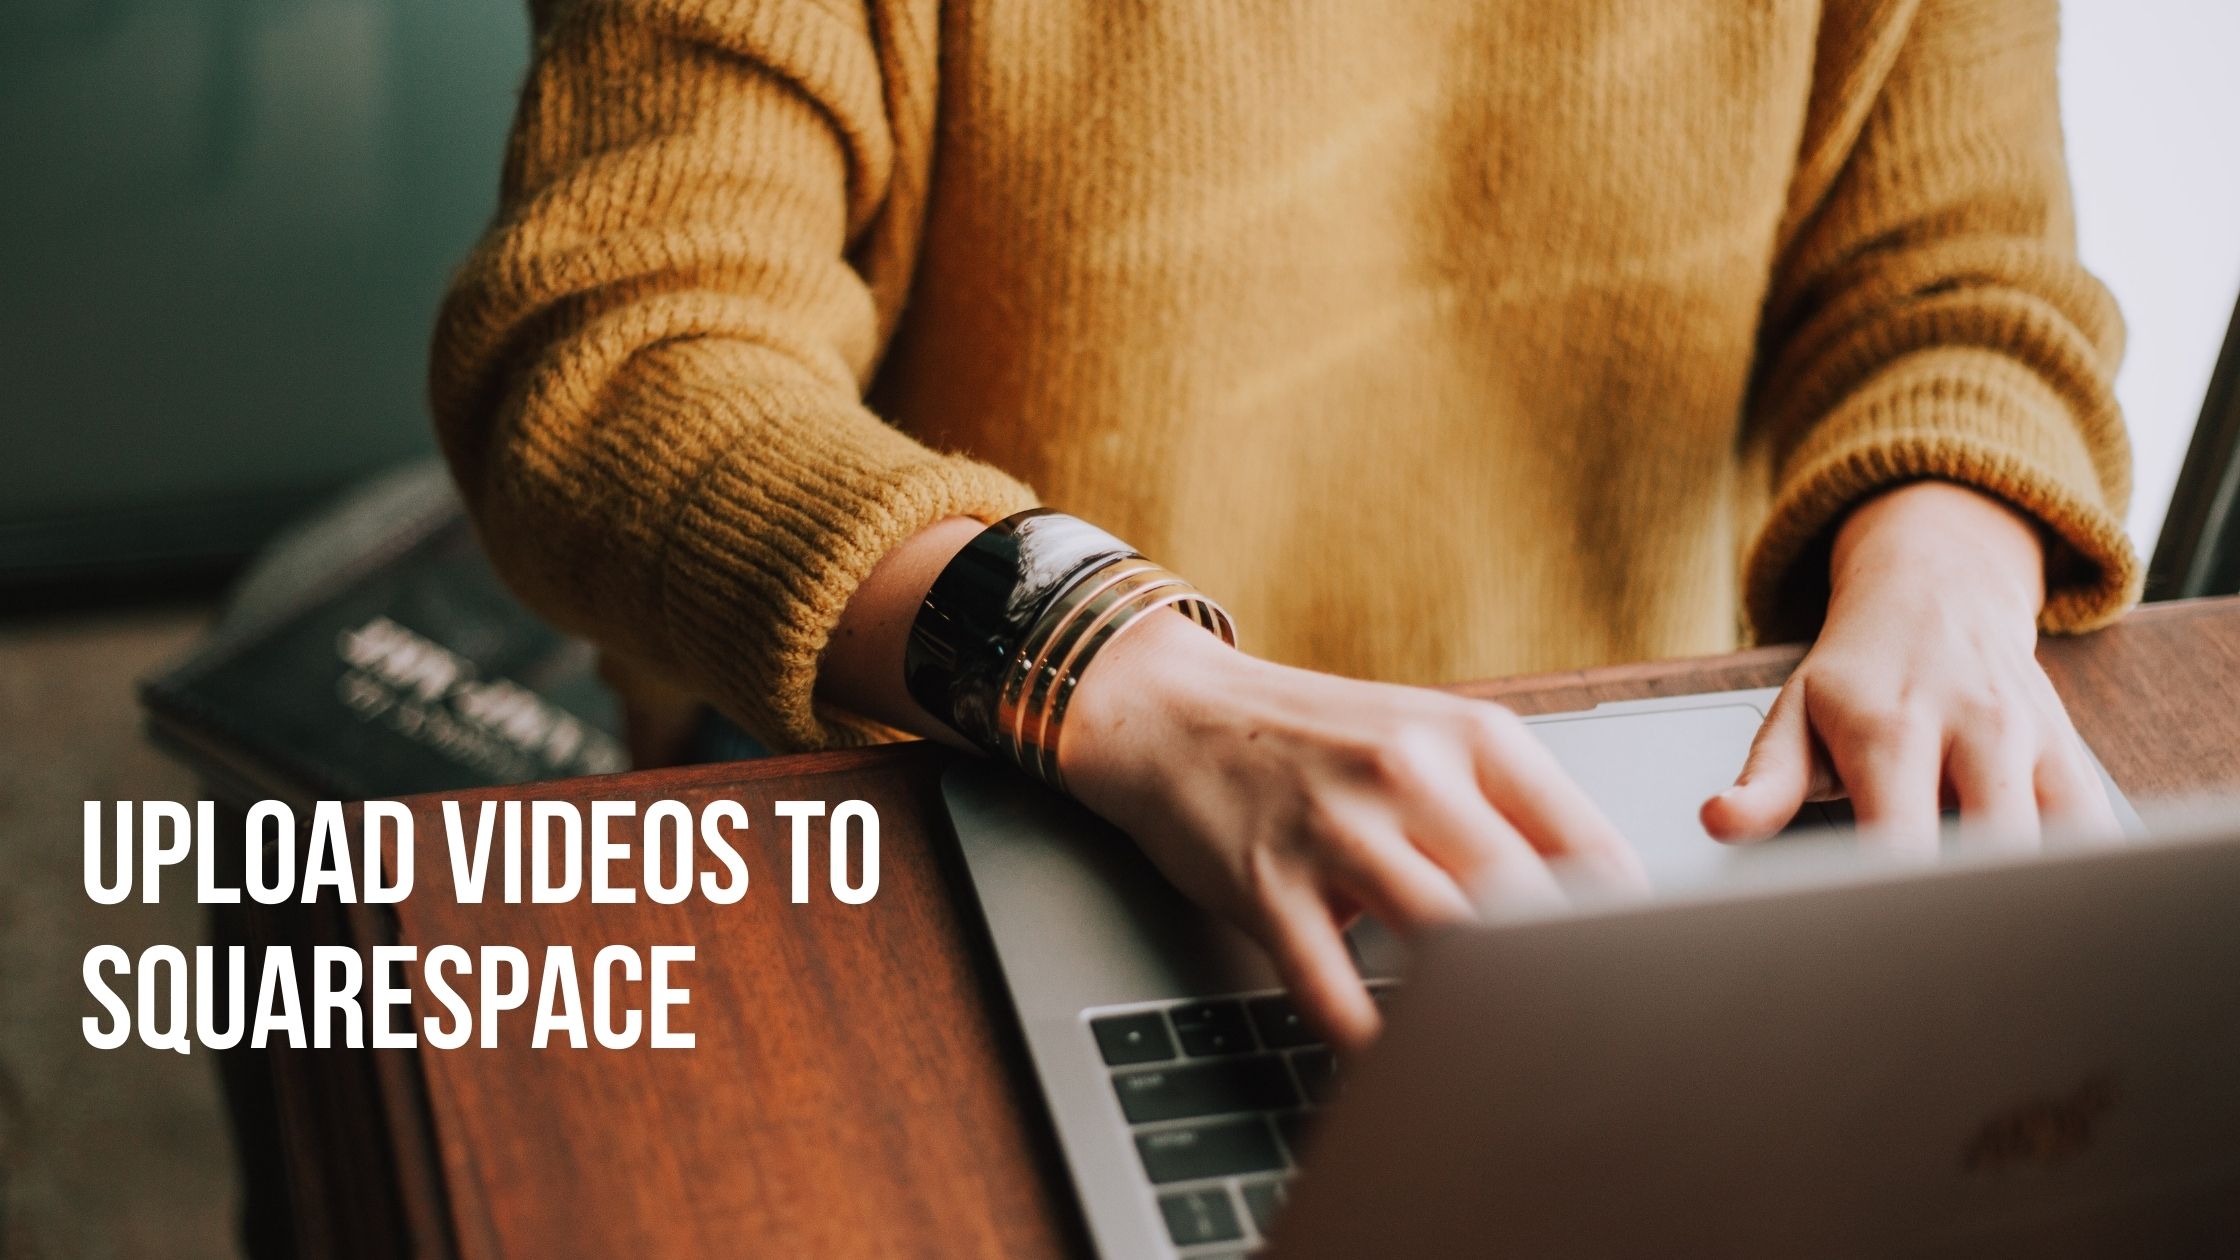 In this post, we'll show you how to upload videos to Squarespace.